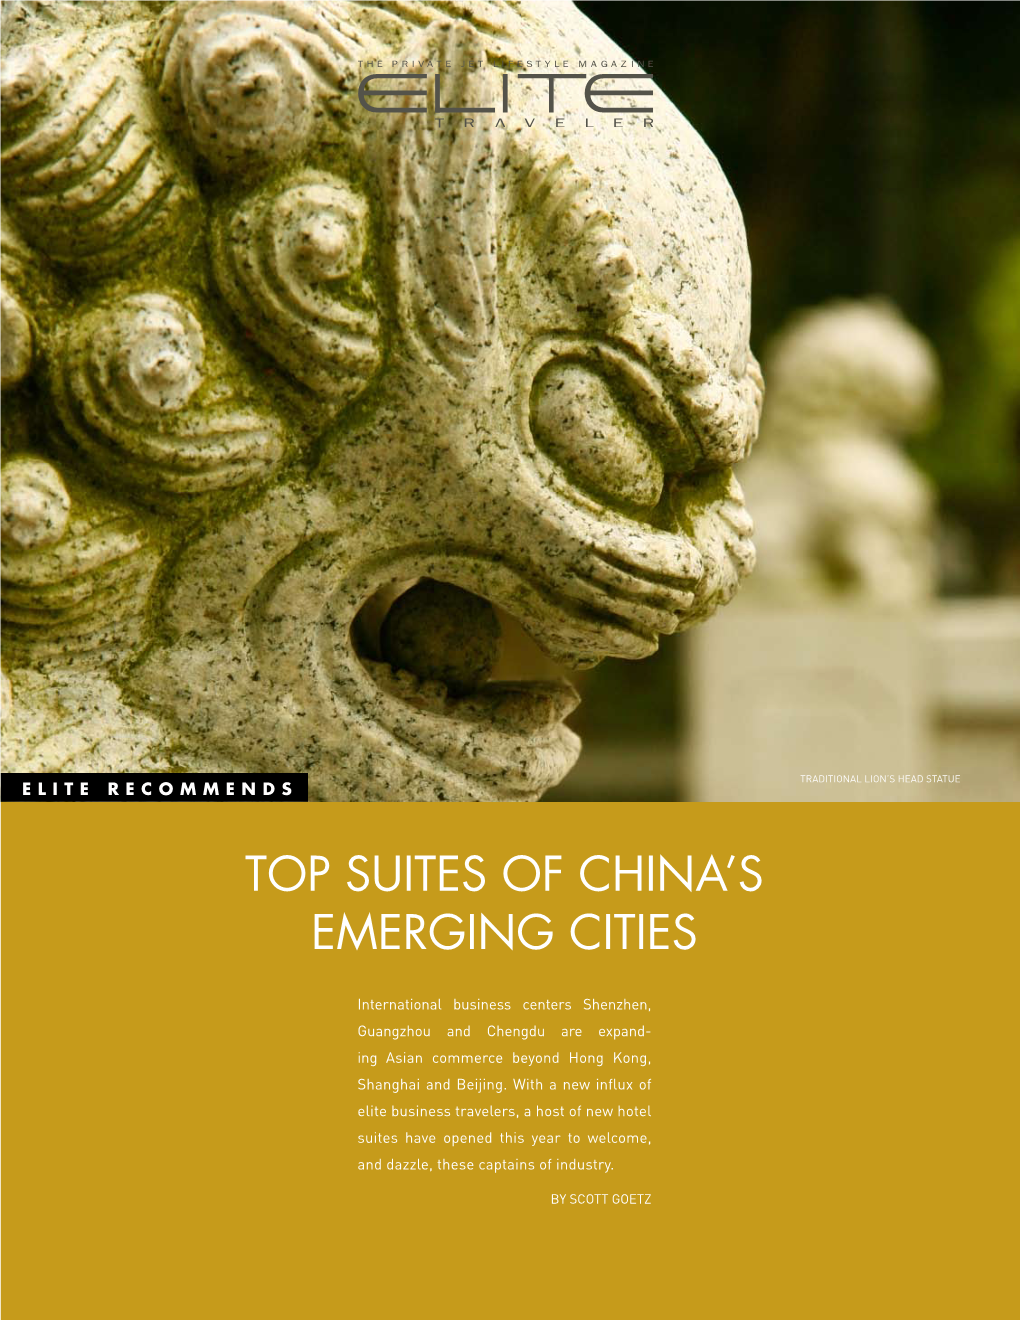 Top Suites of China's Emerging Cities